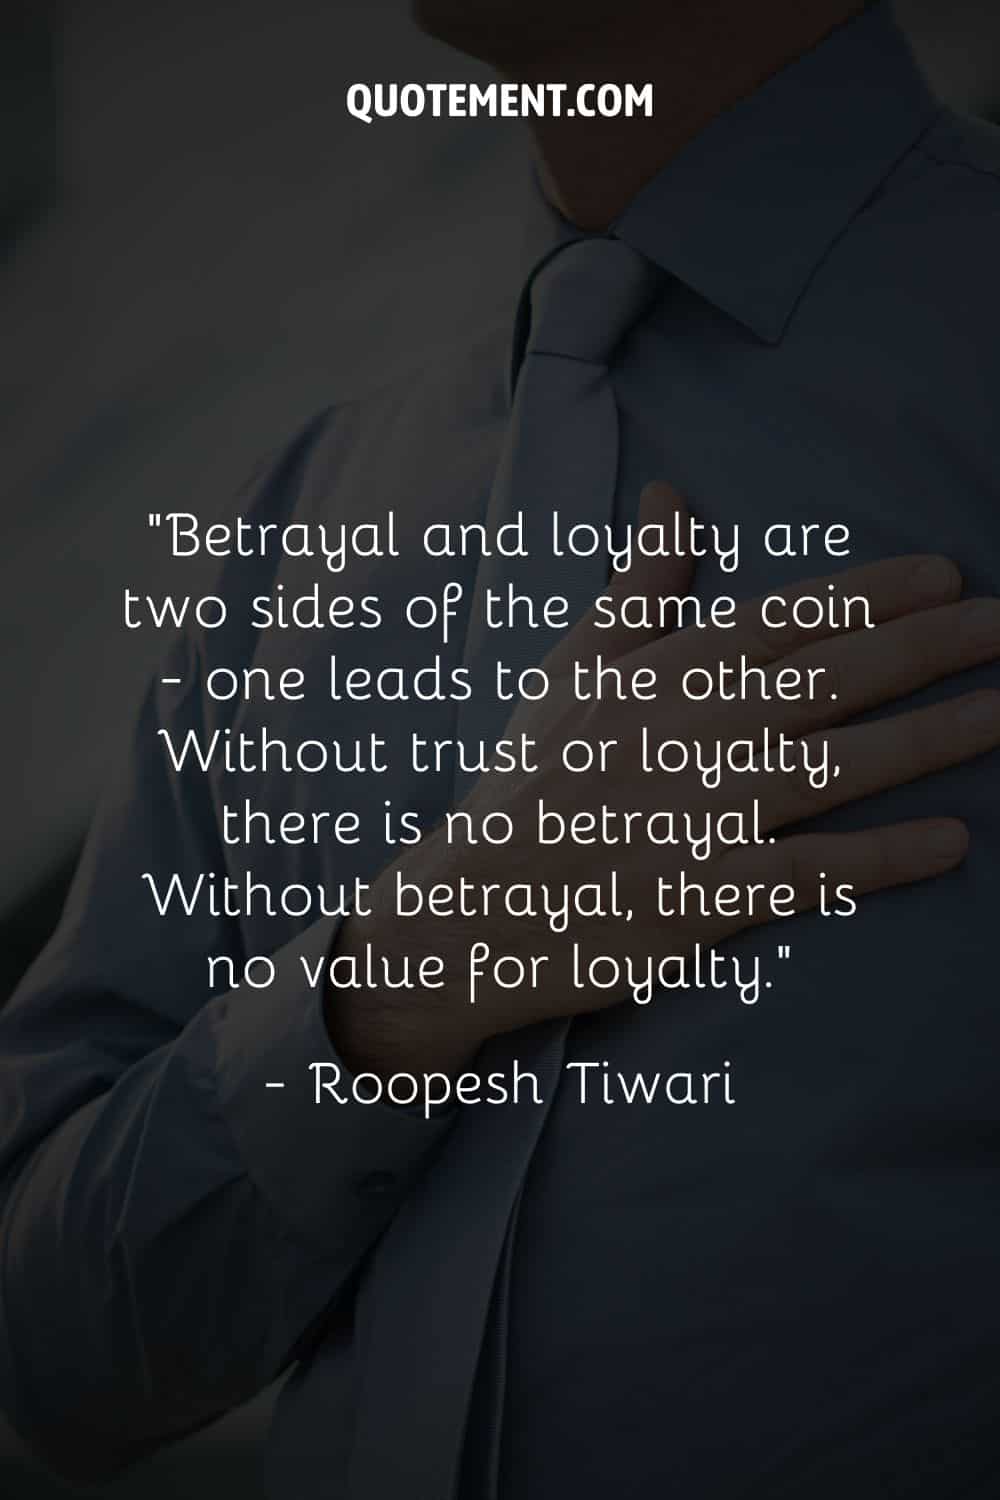 “Betrayal and loyalty are two sides of the same coin—one leads to the other. Without trust or loyalty, there is no betrayal.